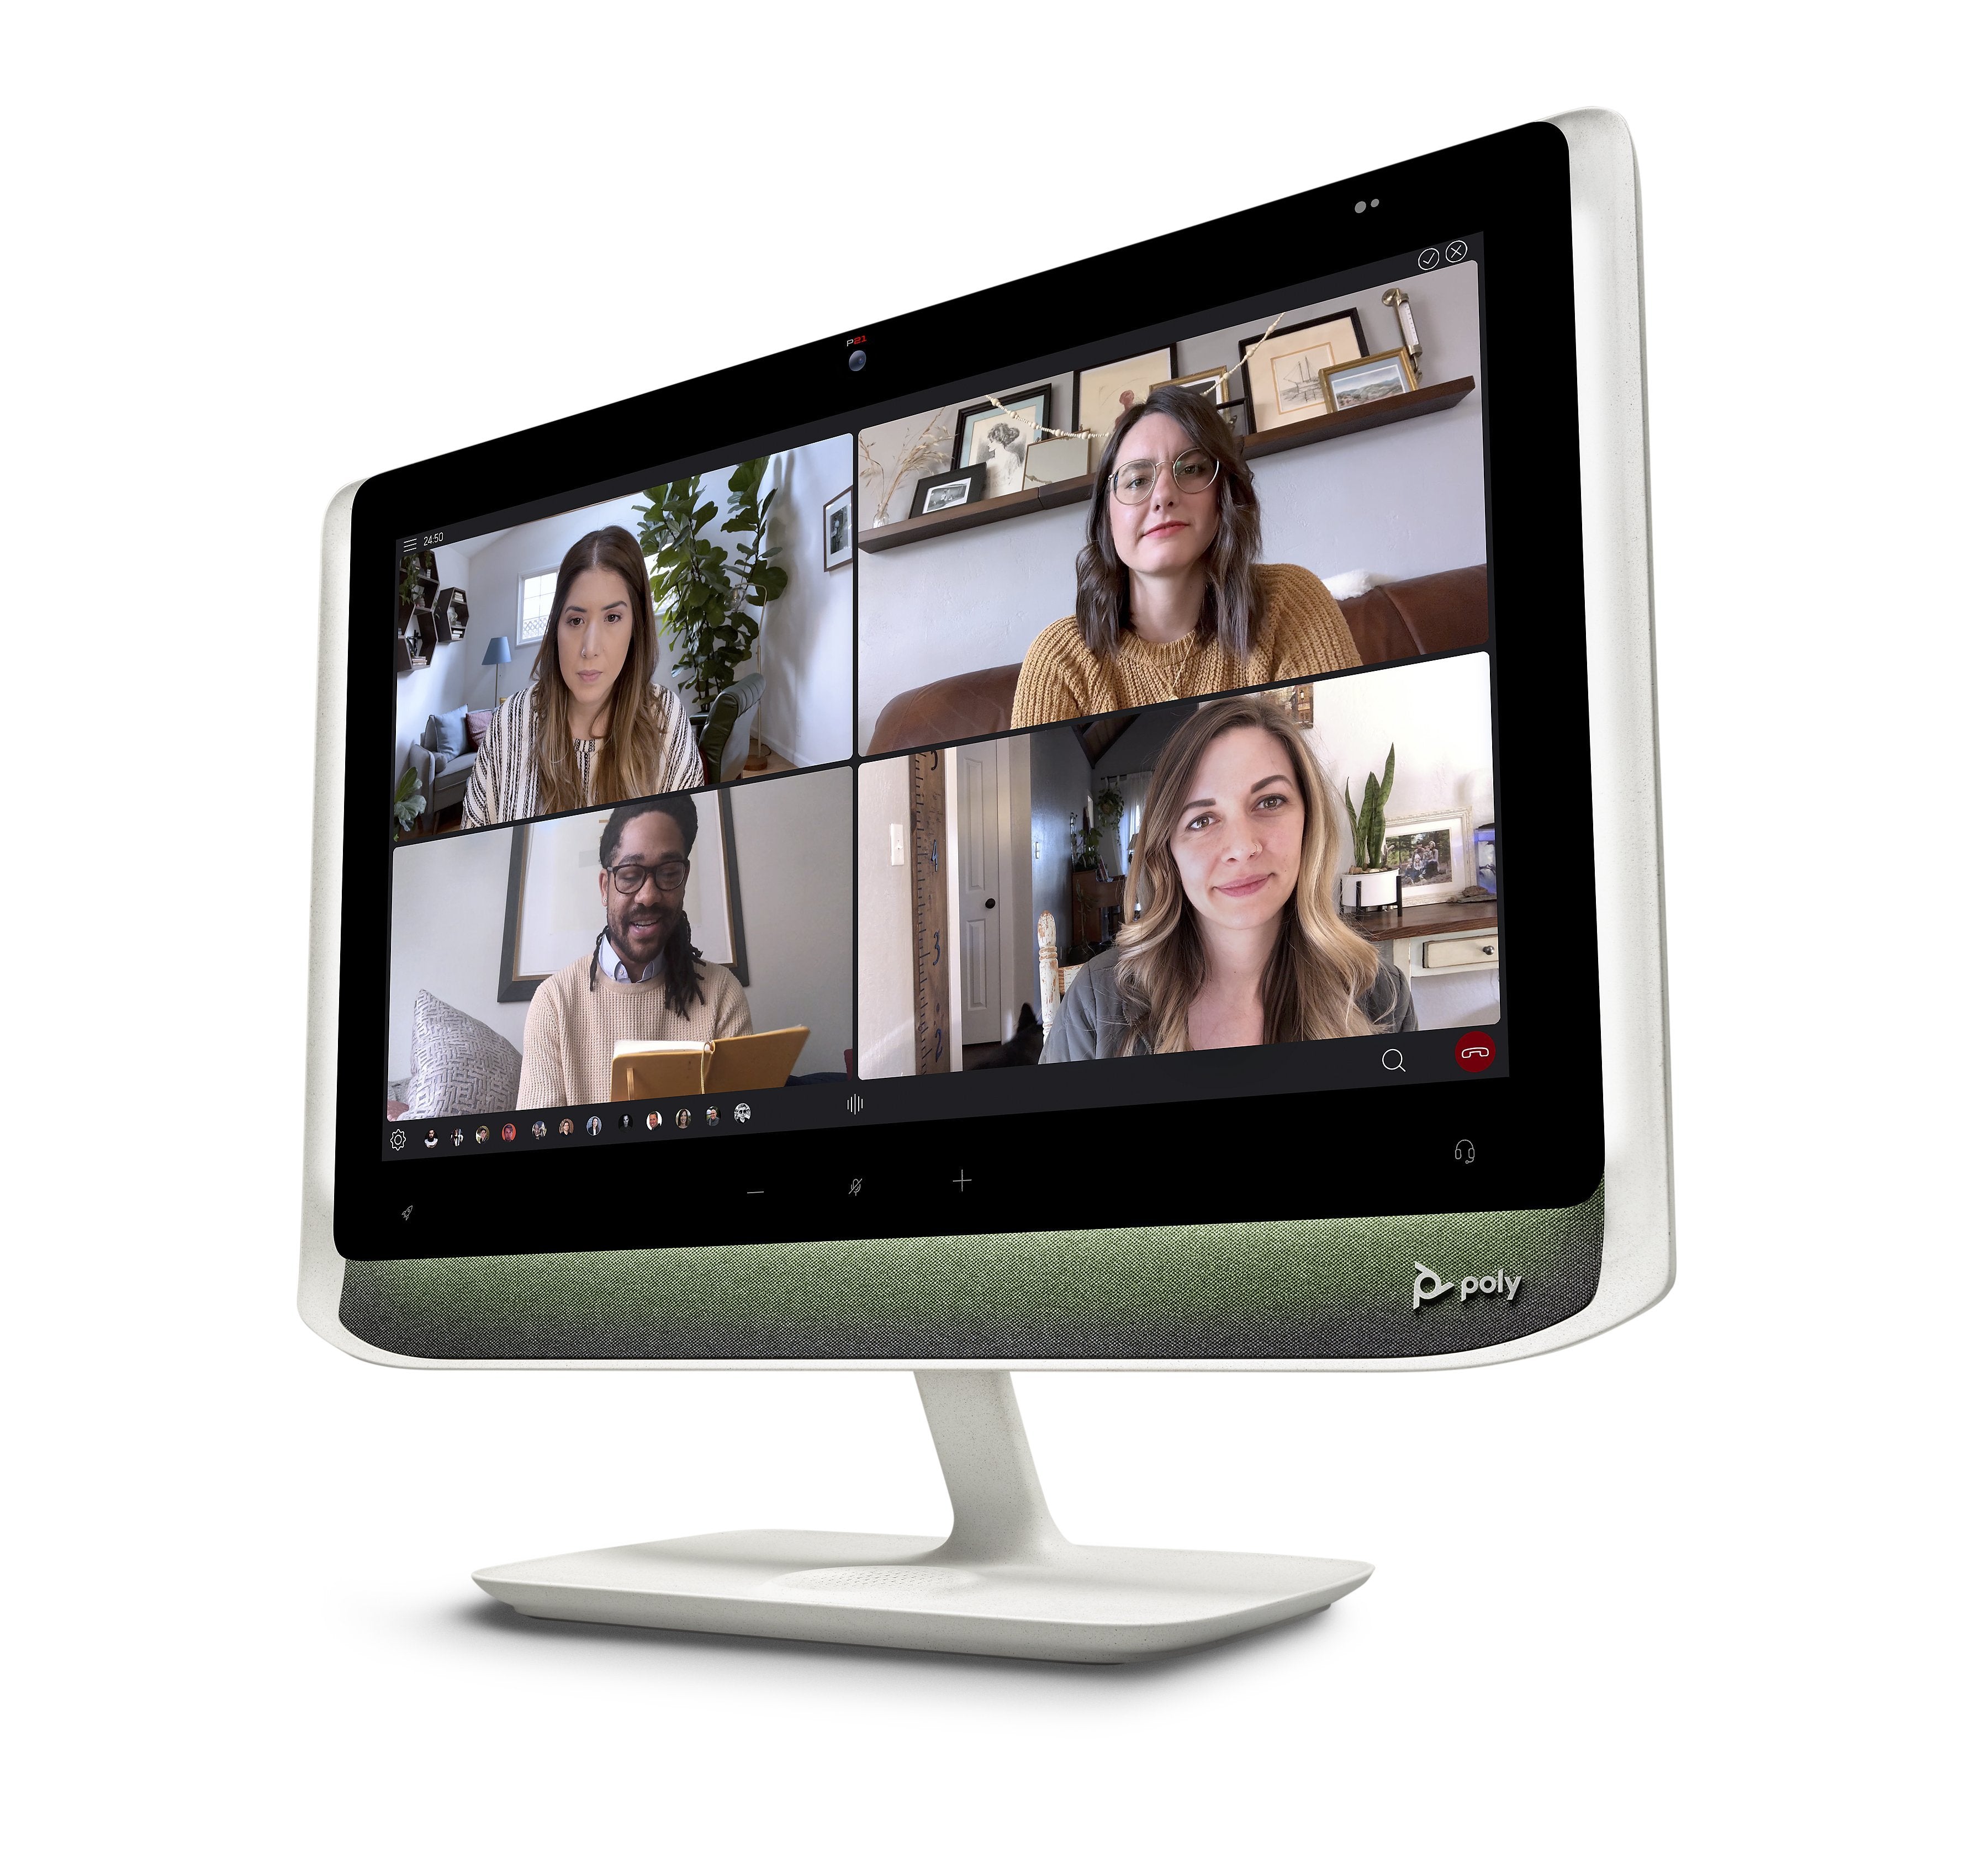 Poly Studio P21 Business Monitor, Speakerphone, and Camera All-in-one Device for Video Meetings USB-C, USB-A - 2200-87100-001 - Headset Advisor